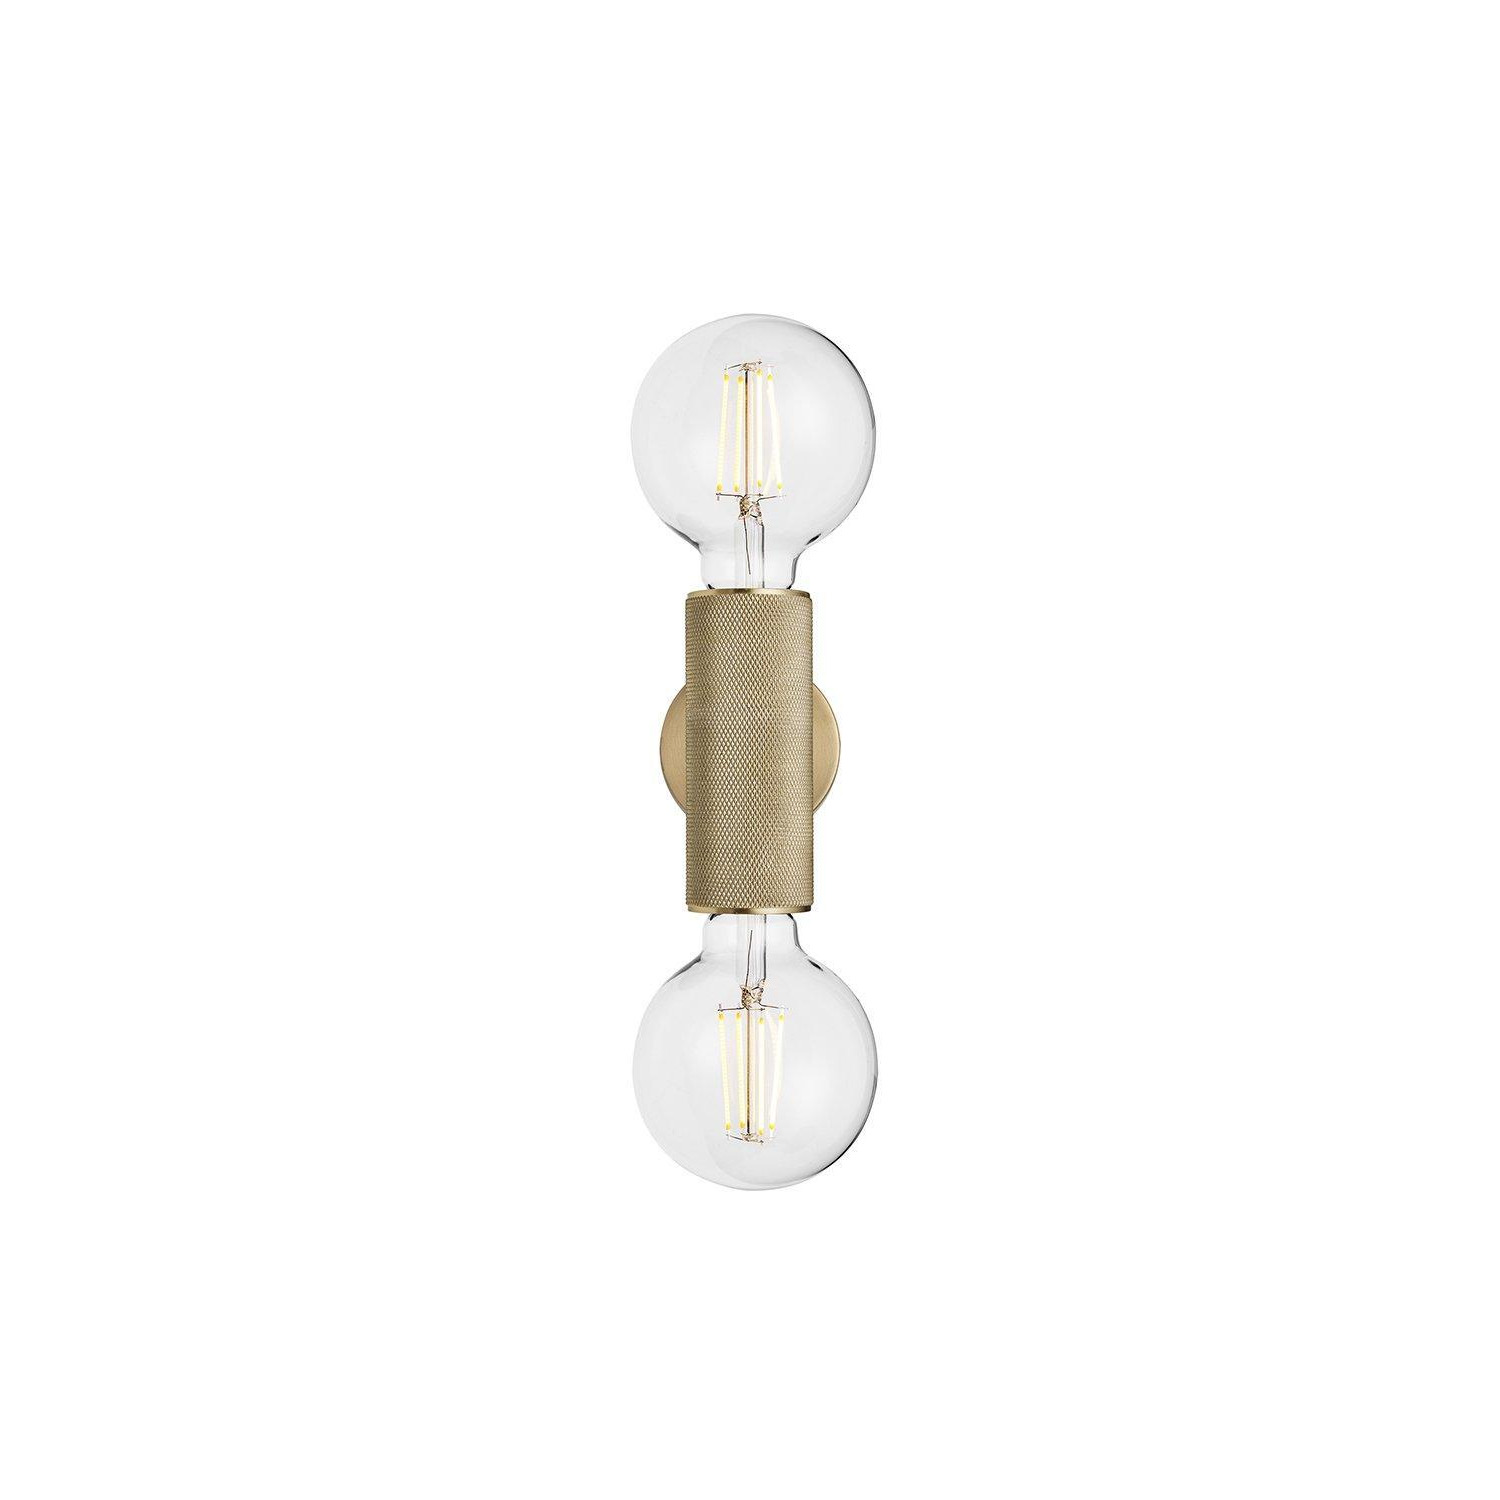 Knurled Edison Double Wall Light, Brass - image 1